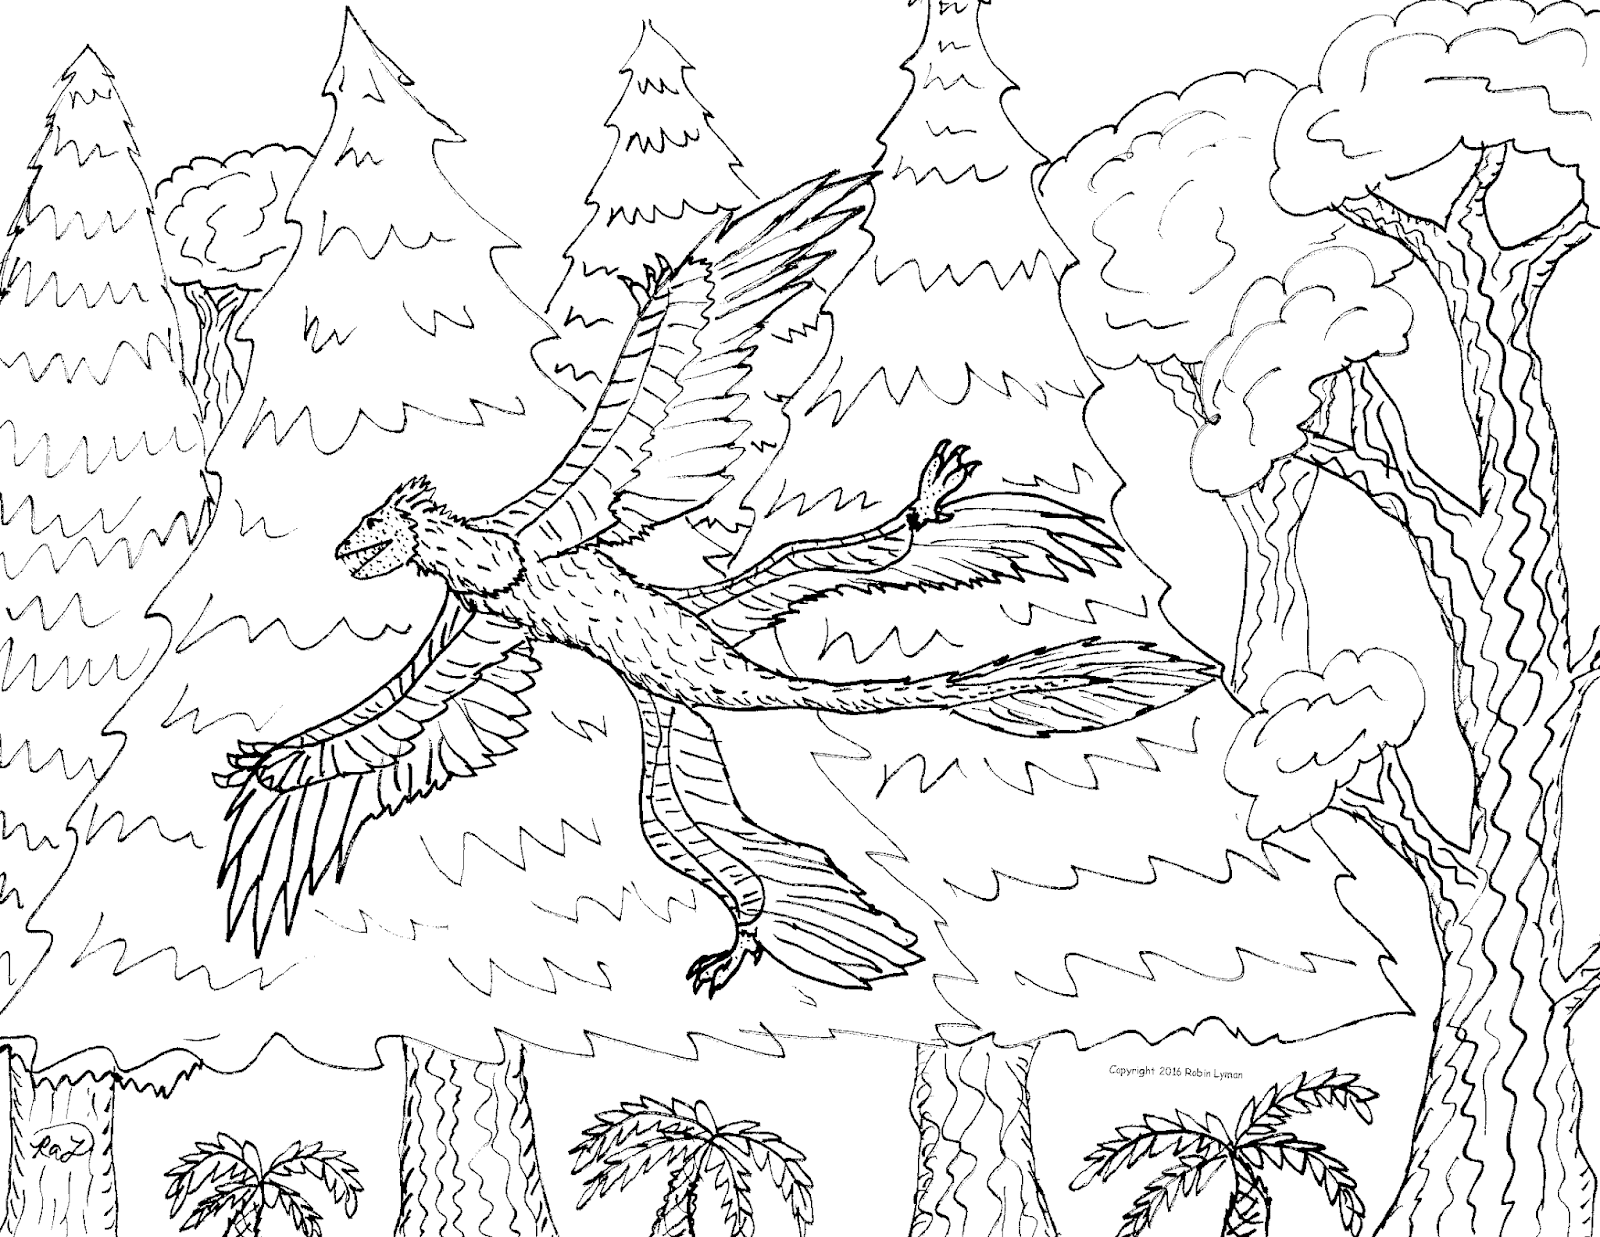 Download Robin's Great Coloring Pages: Archaeopteryx Pair in the Jurassic Forest